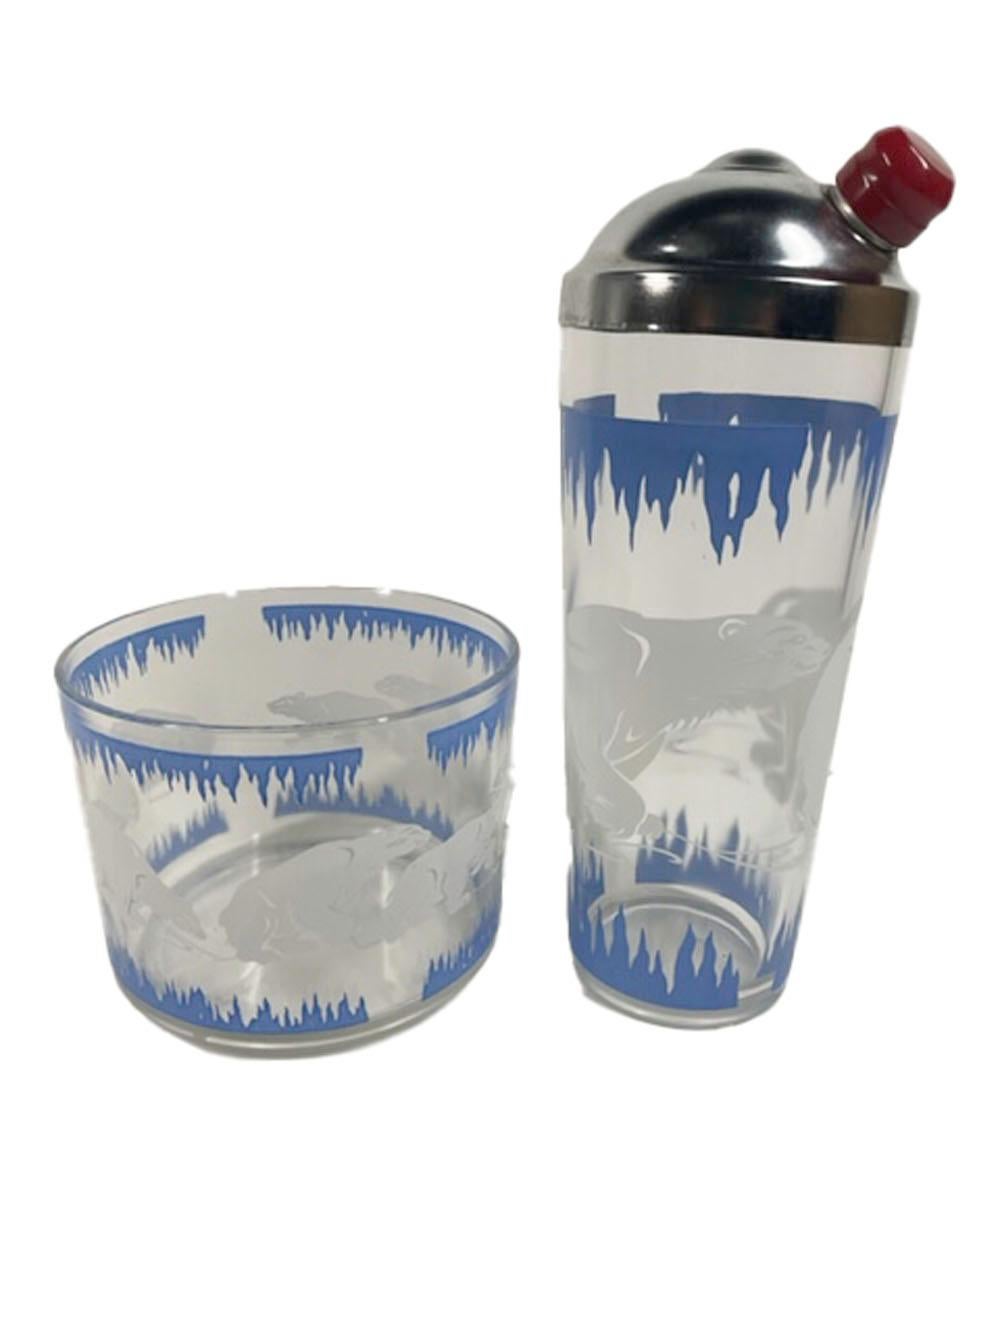 Art Deco Polar Bear Cocktail Shaker and Ice Bowl by Hazel-Atlas In Good Condition For Sale In Nantucket, MA